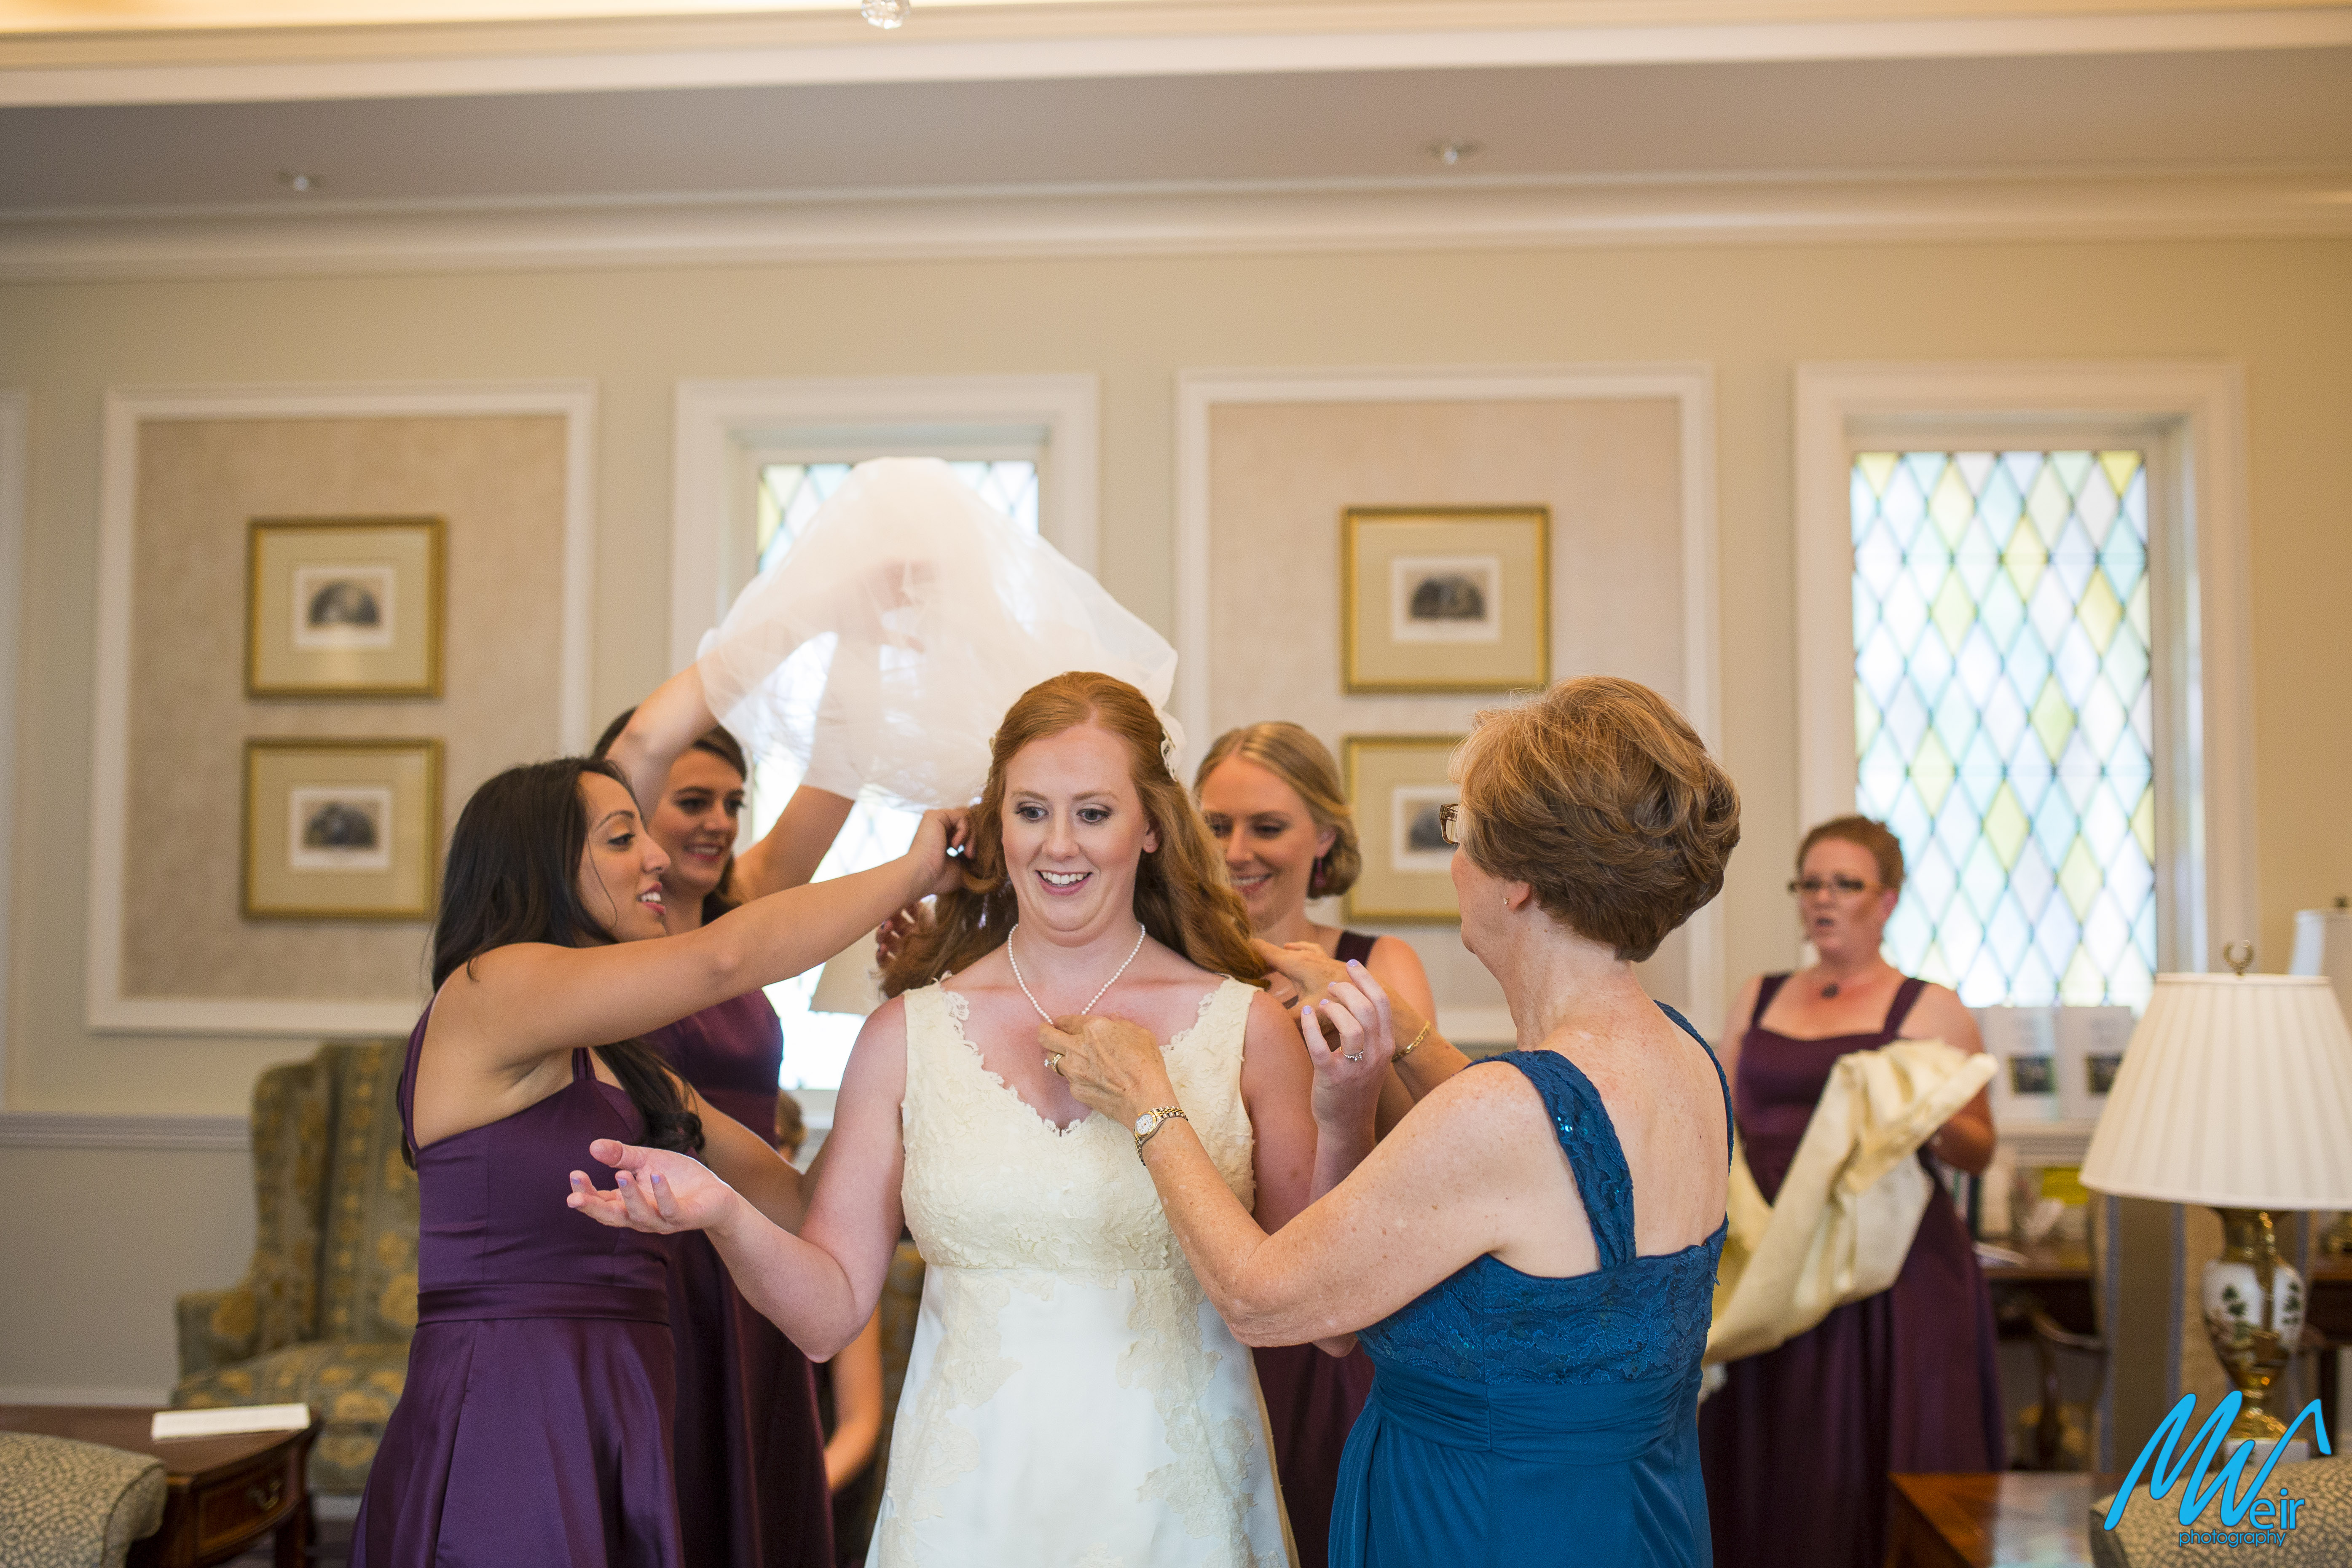 everyone helps bride put her jewelry on